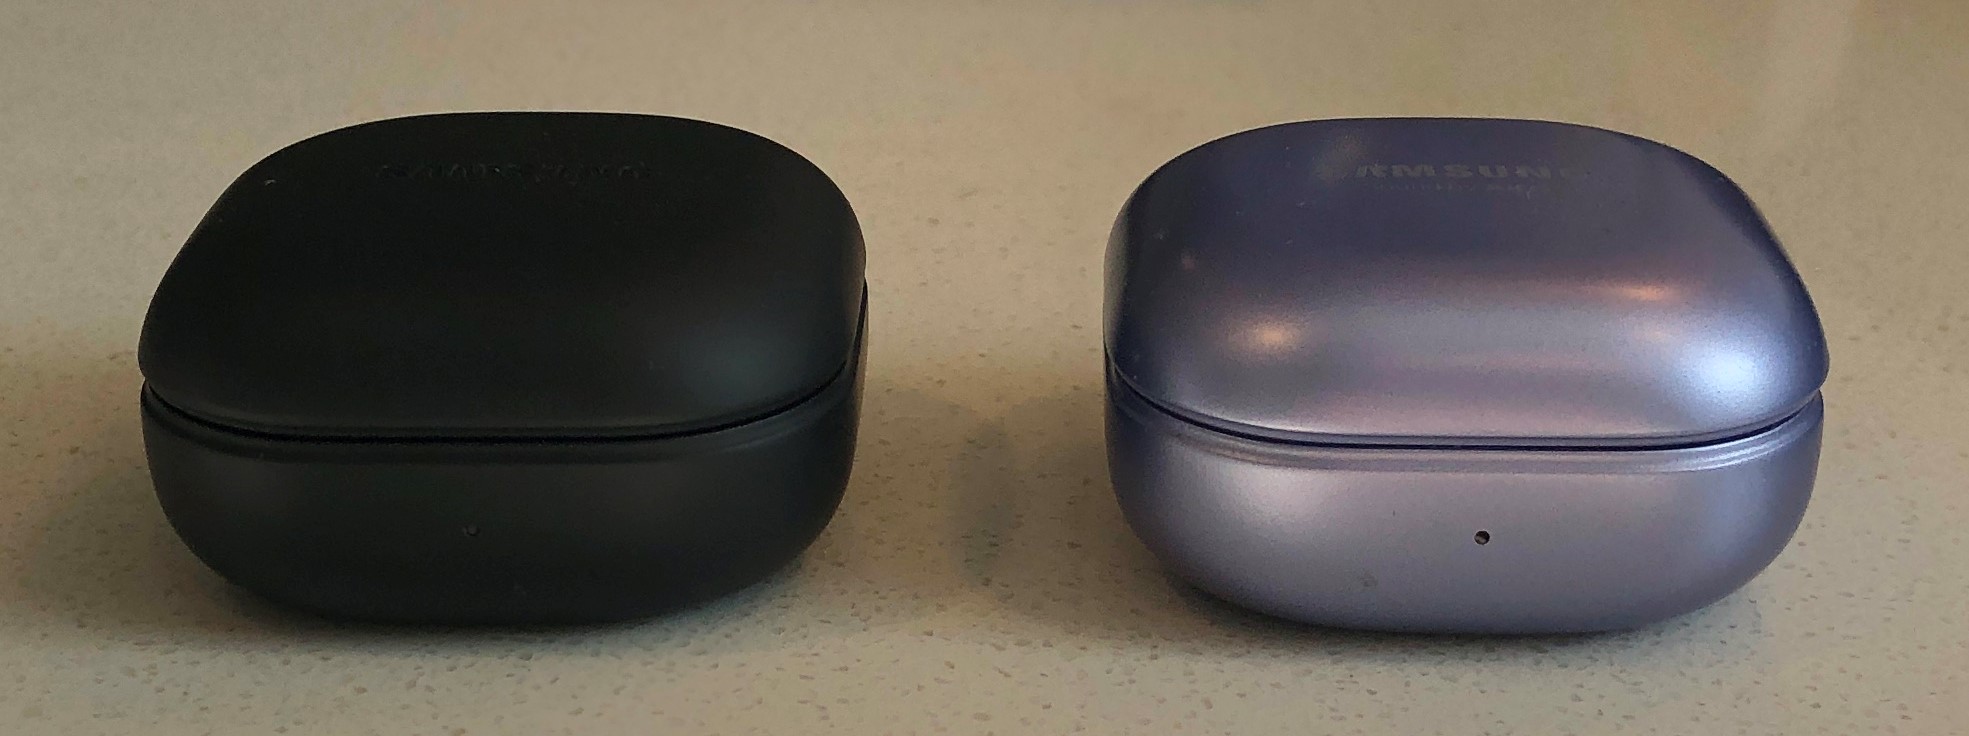 Samsung Galaxy Buds2 Pro vs Buds Pro charging and carrying case side